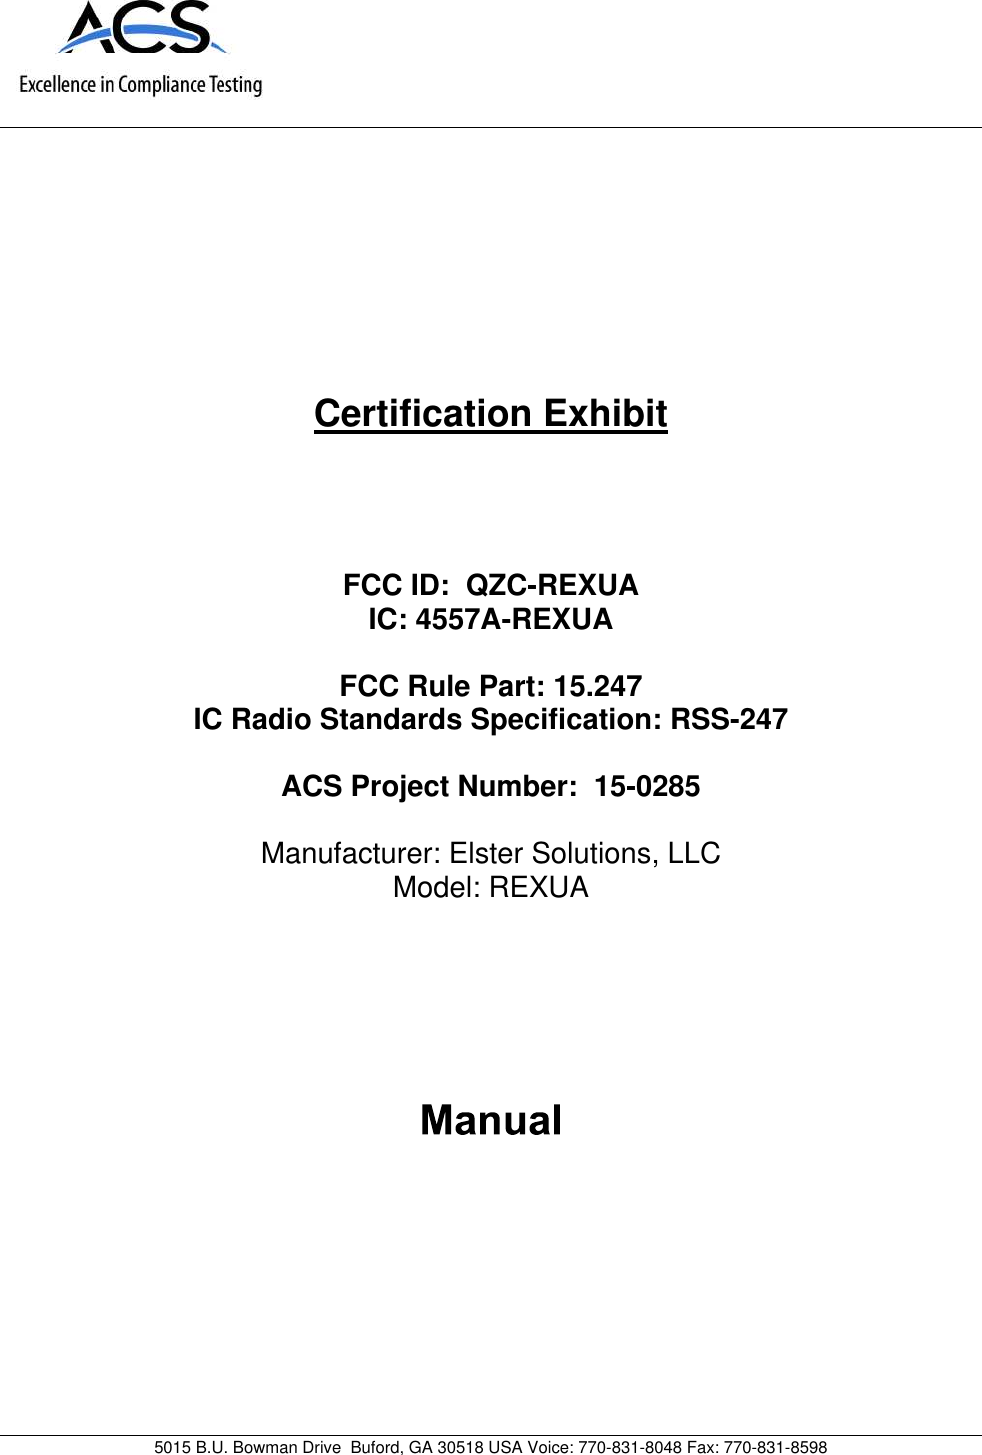 5015 B.U. Bowman Drive Buford, GA 30518 USA Voice: 770-831-8048 Fax: 770-831-8598Certification ExhibitFCC ID: QZC-REXUAIC: 4557A-REXUAFCC Rule Part: 15.247IC Radio Standards Specification: RSS-247ACS Project Number: 15-0285Manufacturer: Elster Solutions, LLCModel: REXUA